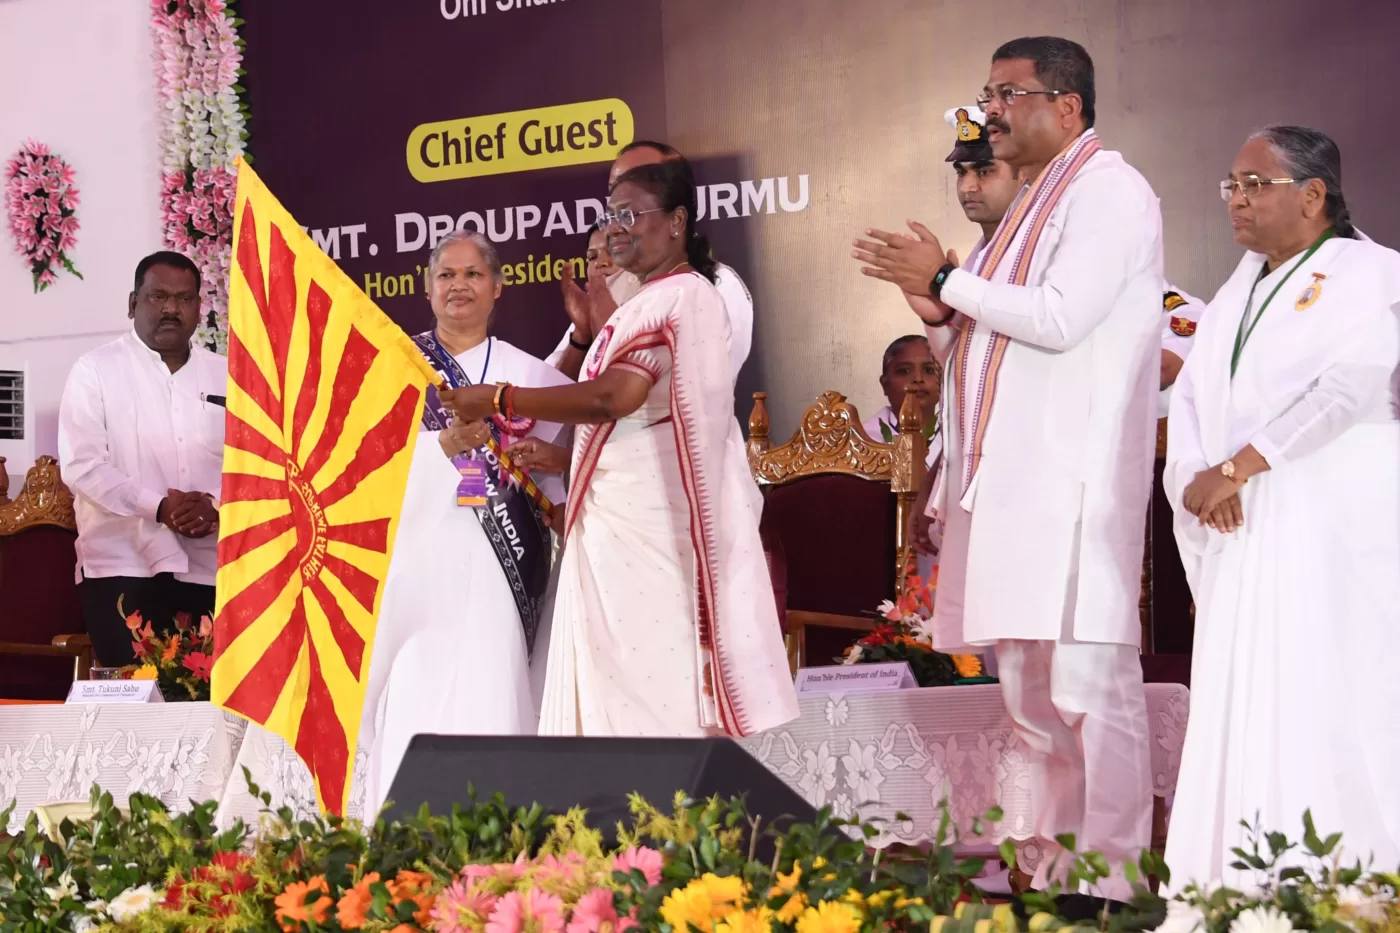 Education has always played an important and transformative role in building society – President Draupadi Murmu